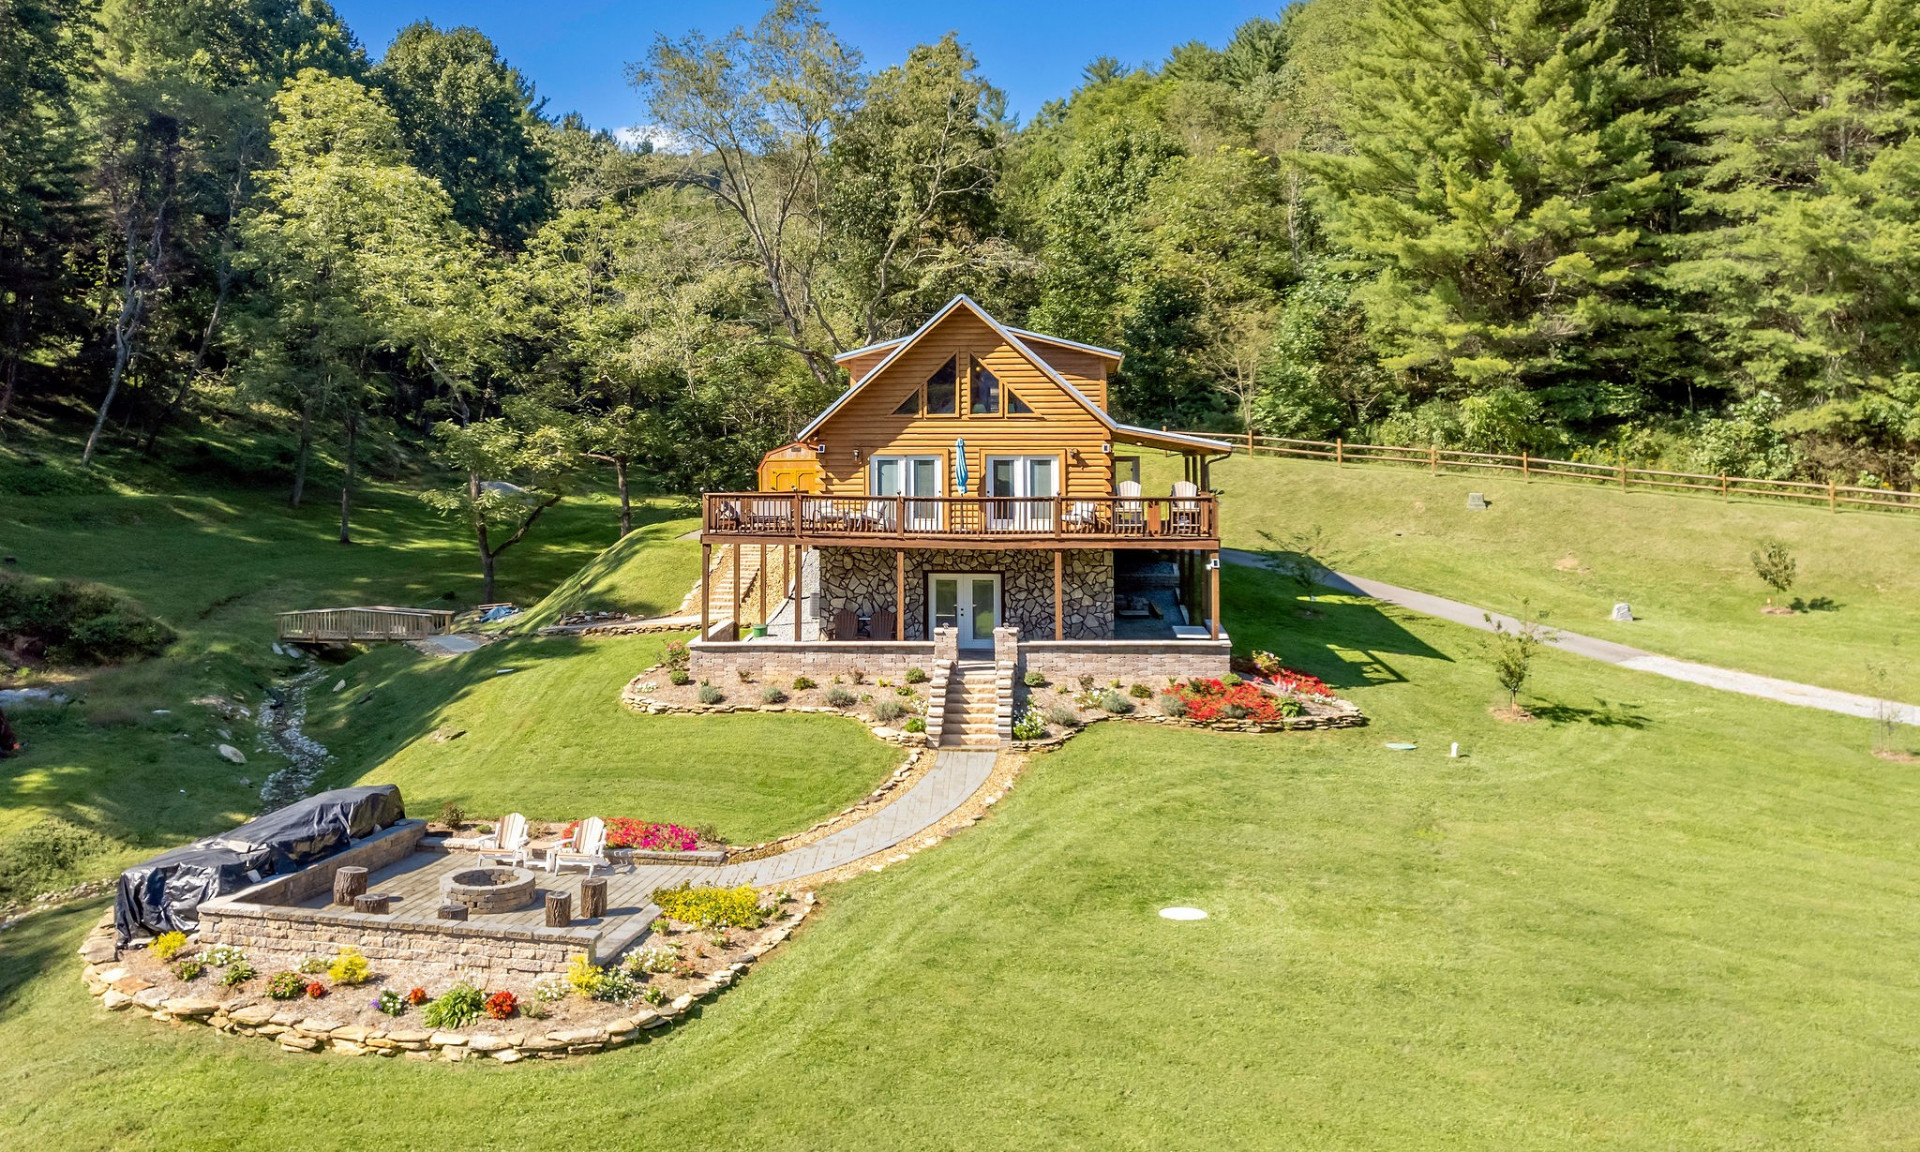 NC Dreams mountain cabin with spacious yard to enjoy the outdoors, all in your front yard.